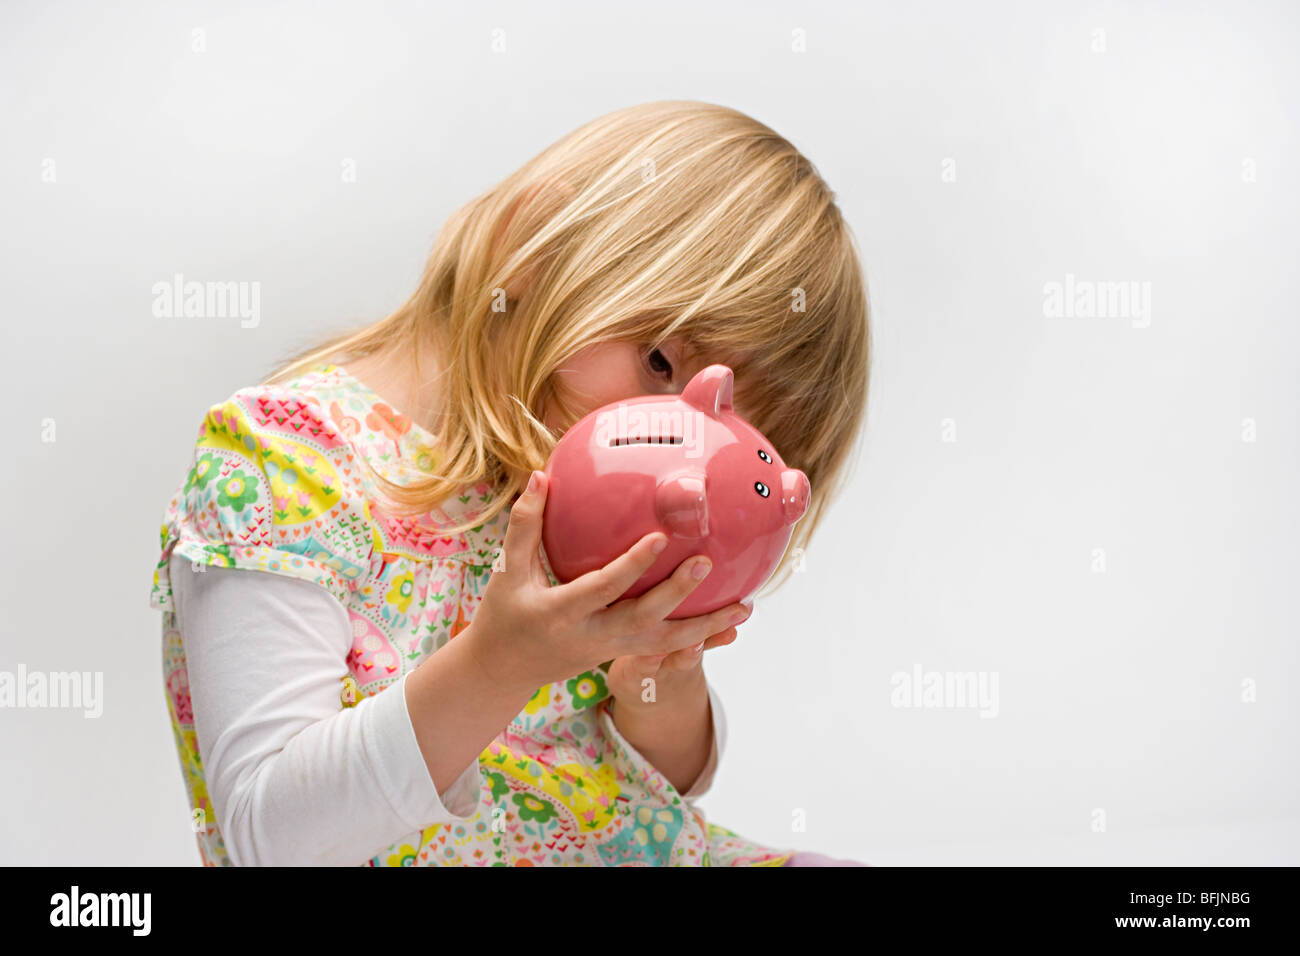 young girl looking into a pink piggy bank Stock Photo